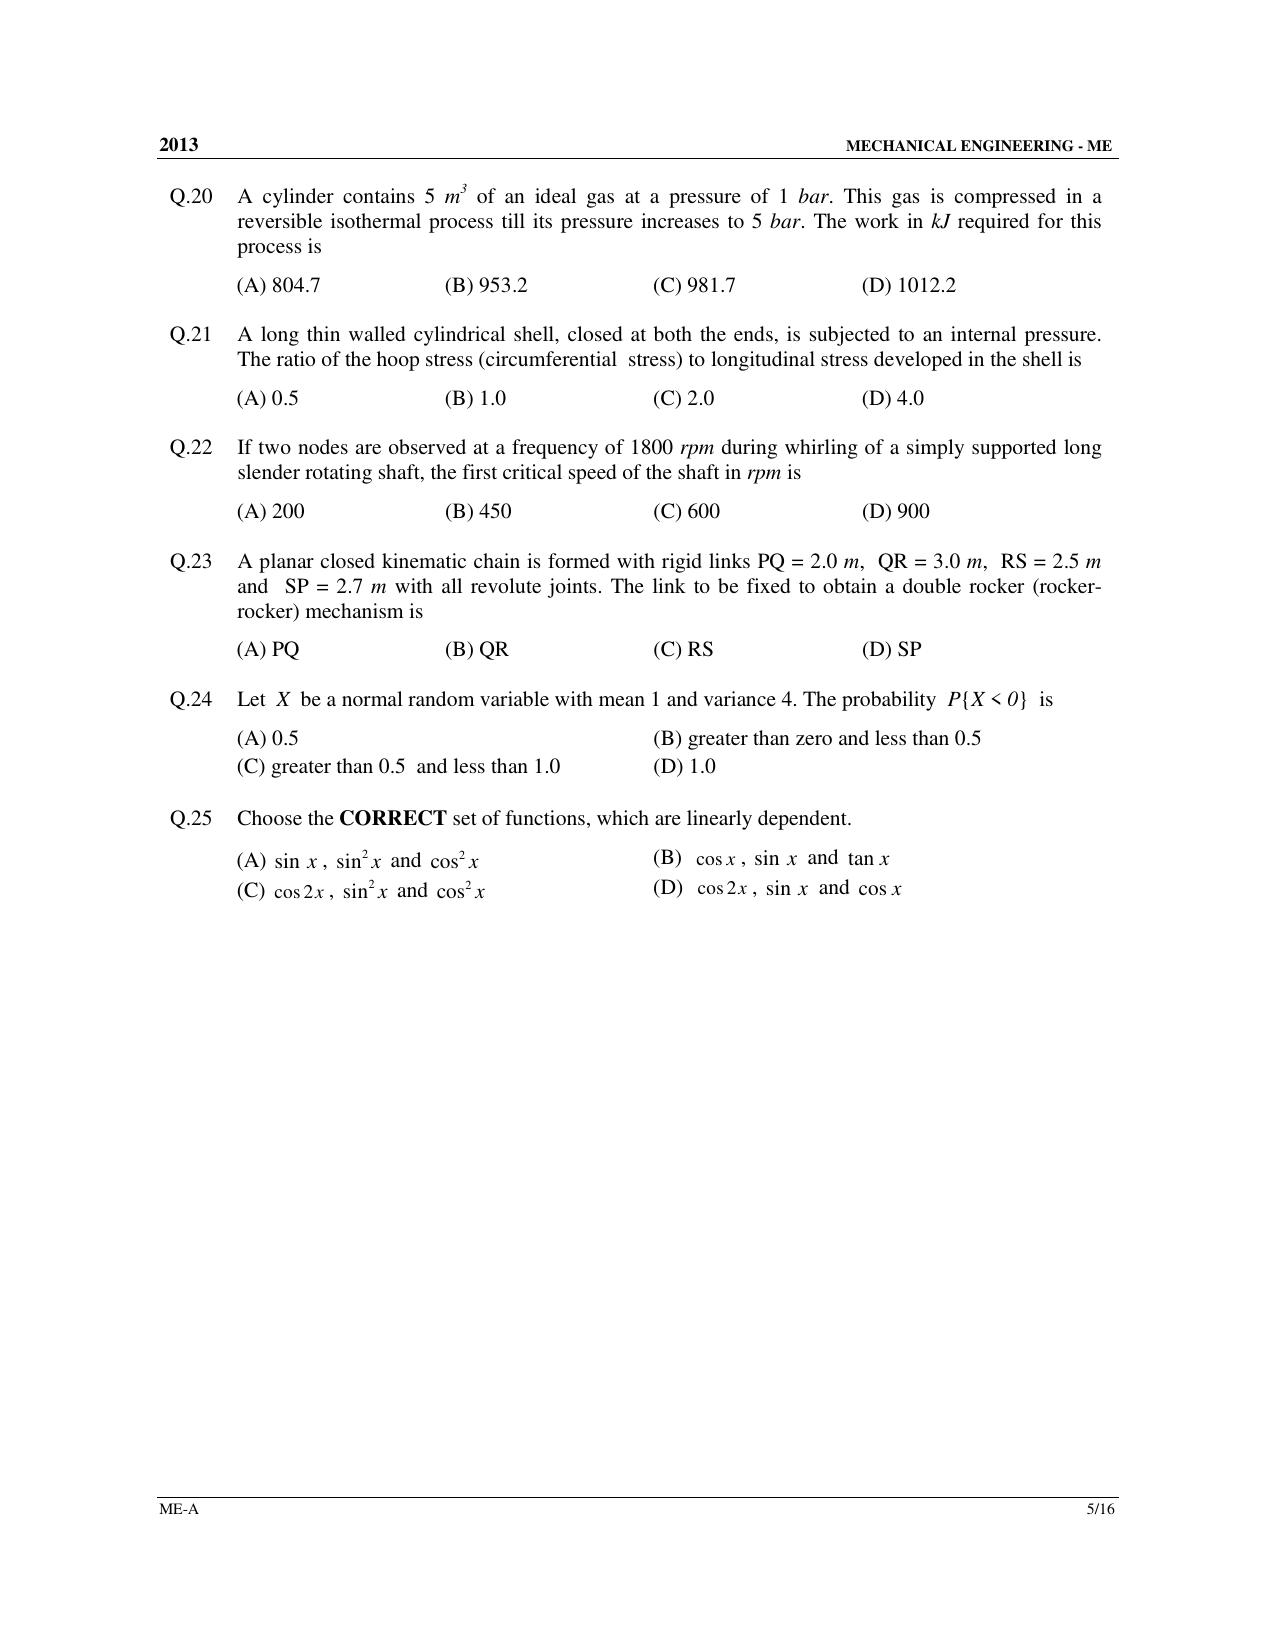 GATE 2013 Mechanical Engineering (ME) Question Paper with Answer Key - Page 6